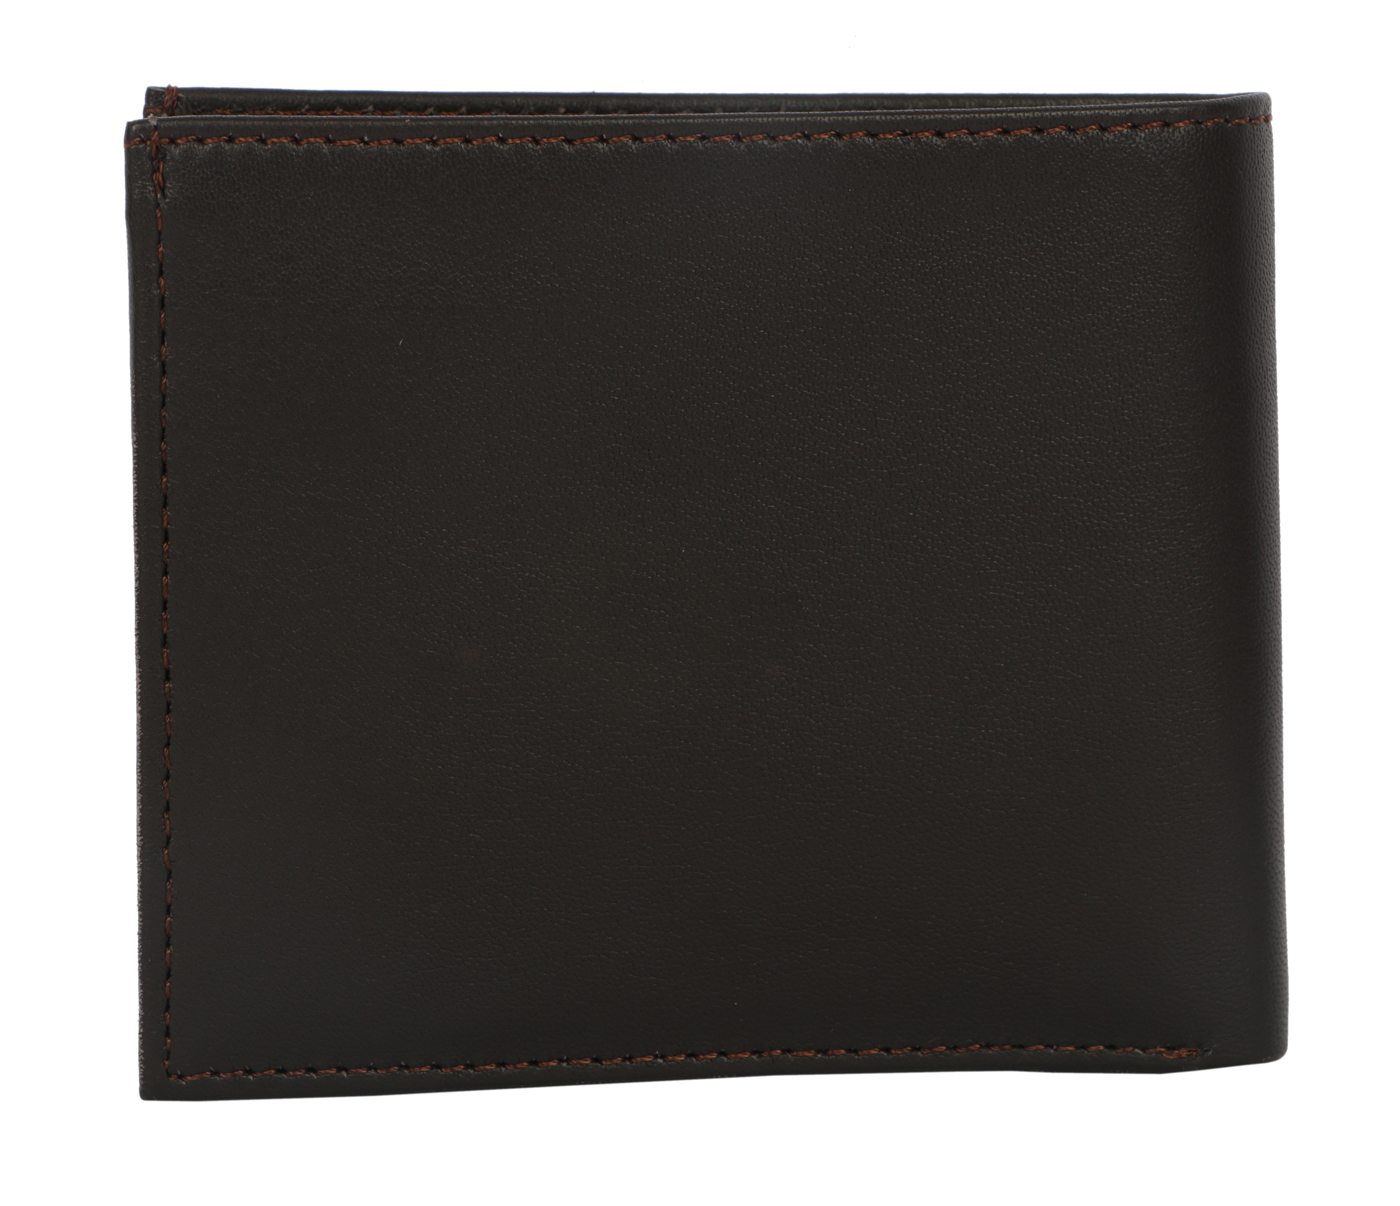 W40-Angelo-Men's bifold wallet with coin pocket in Genuine Leather - Brown